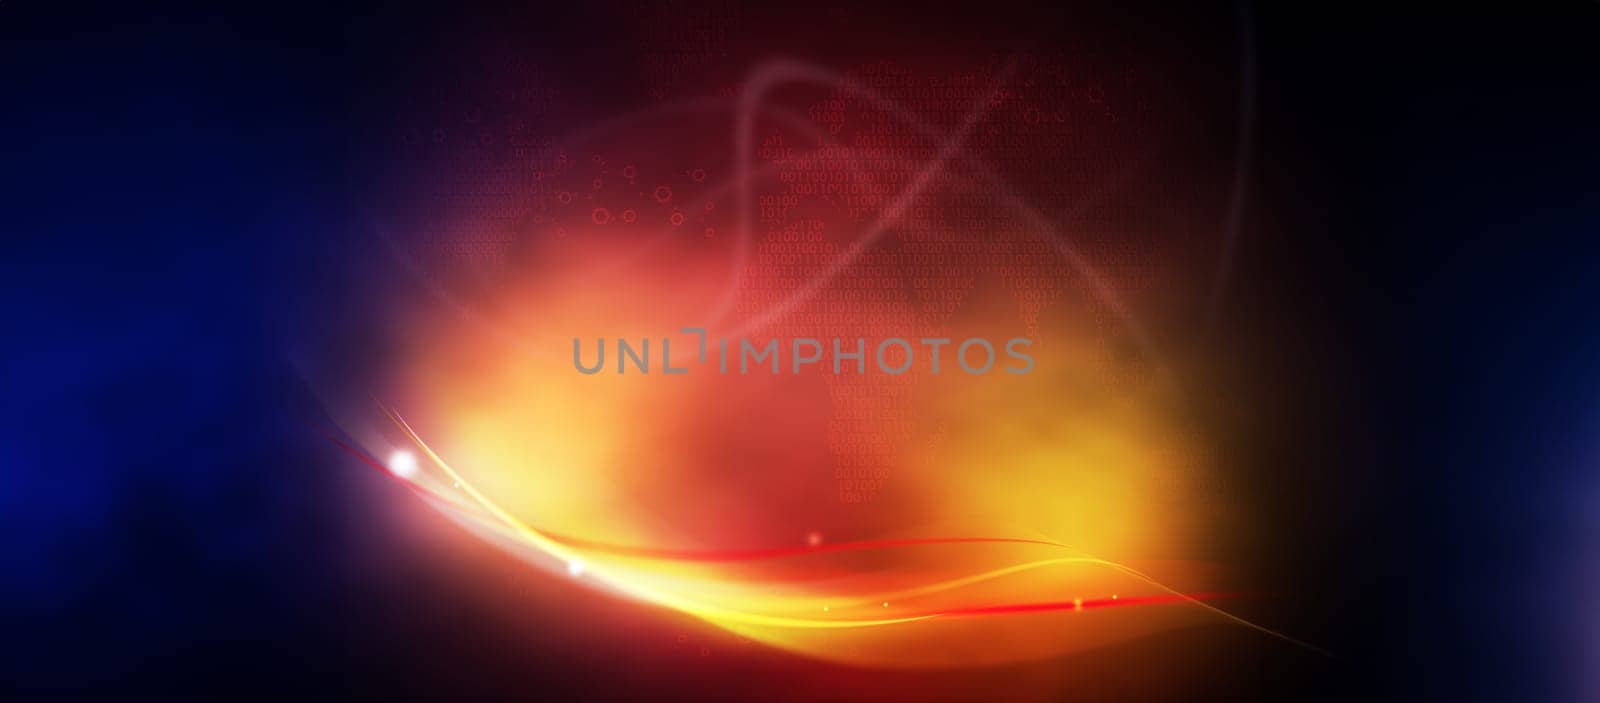 Abstract illustration. Red flash of light and numbers on dark blue background